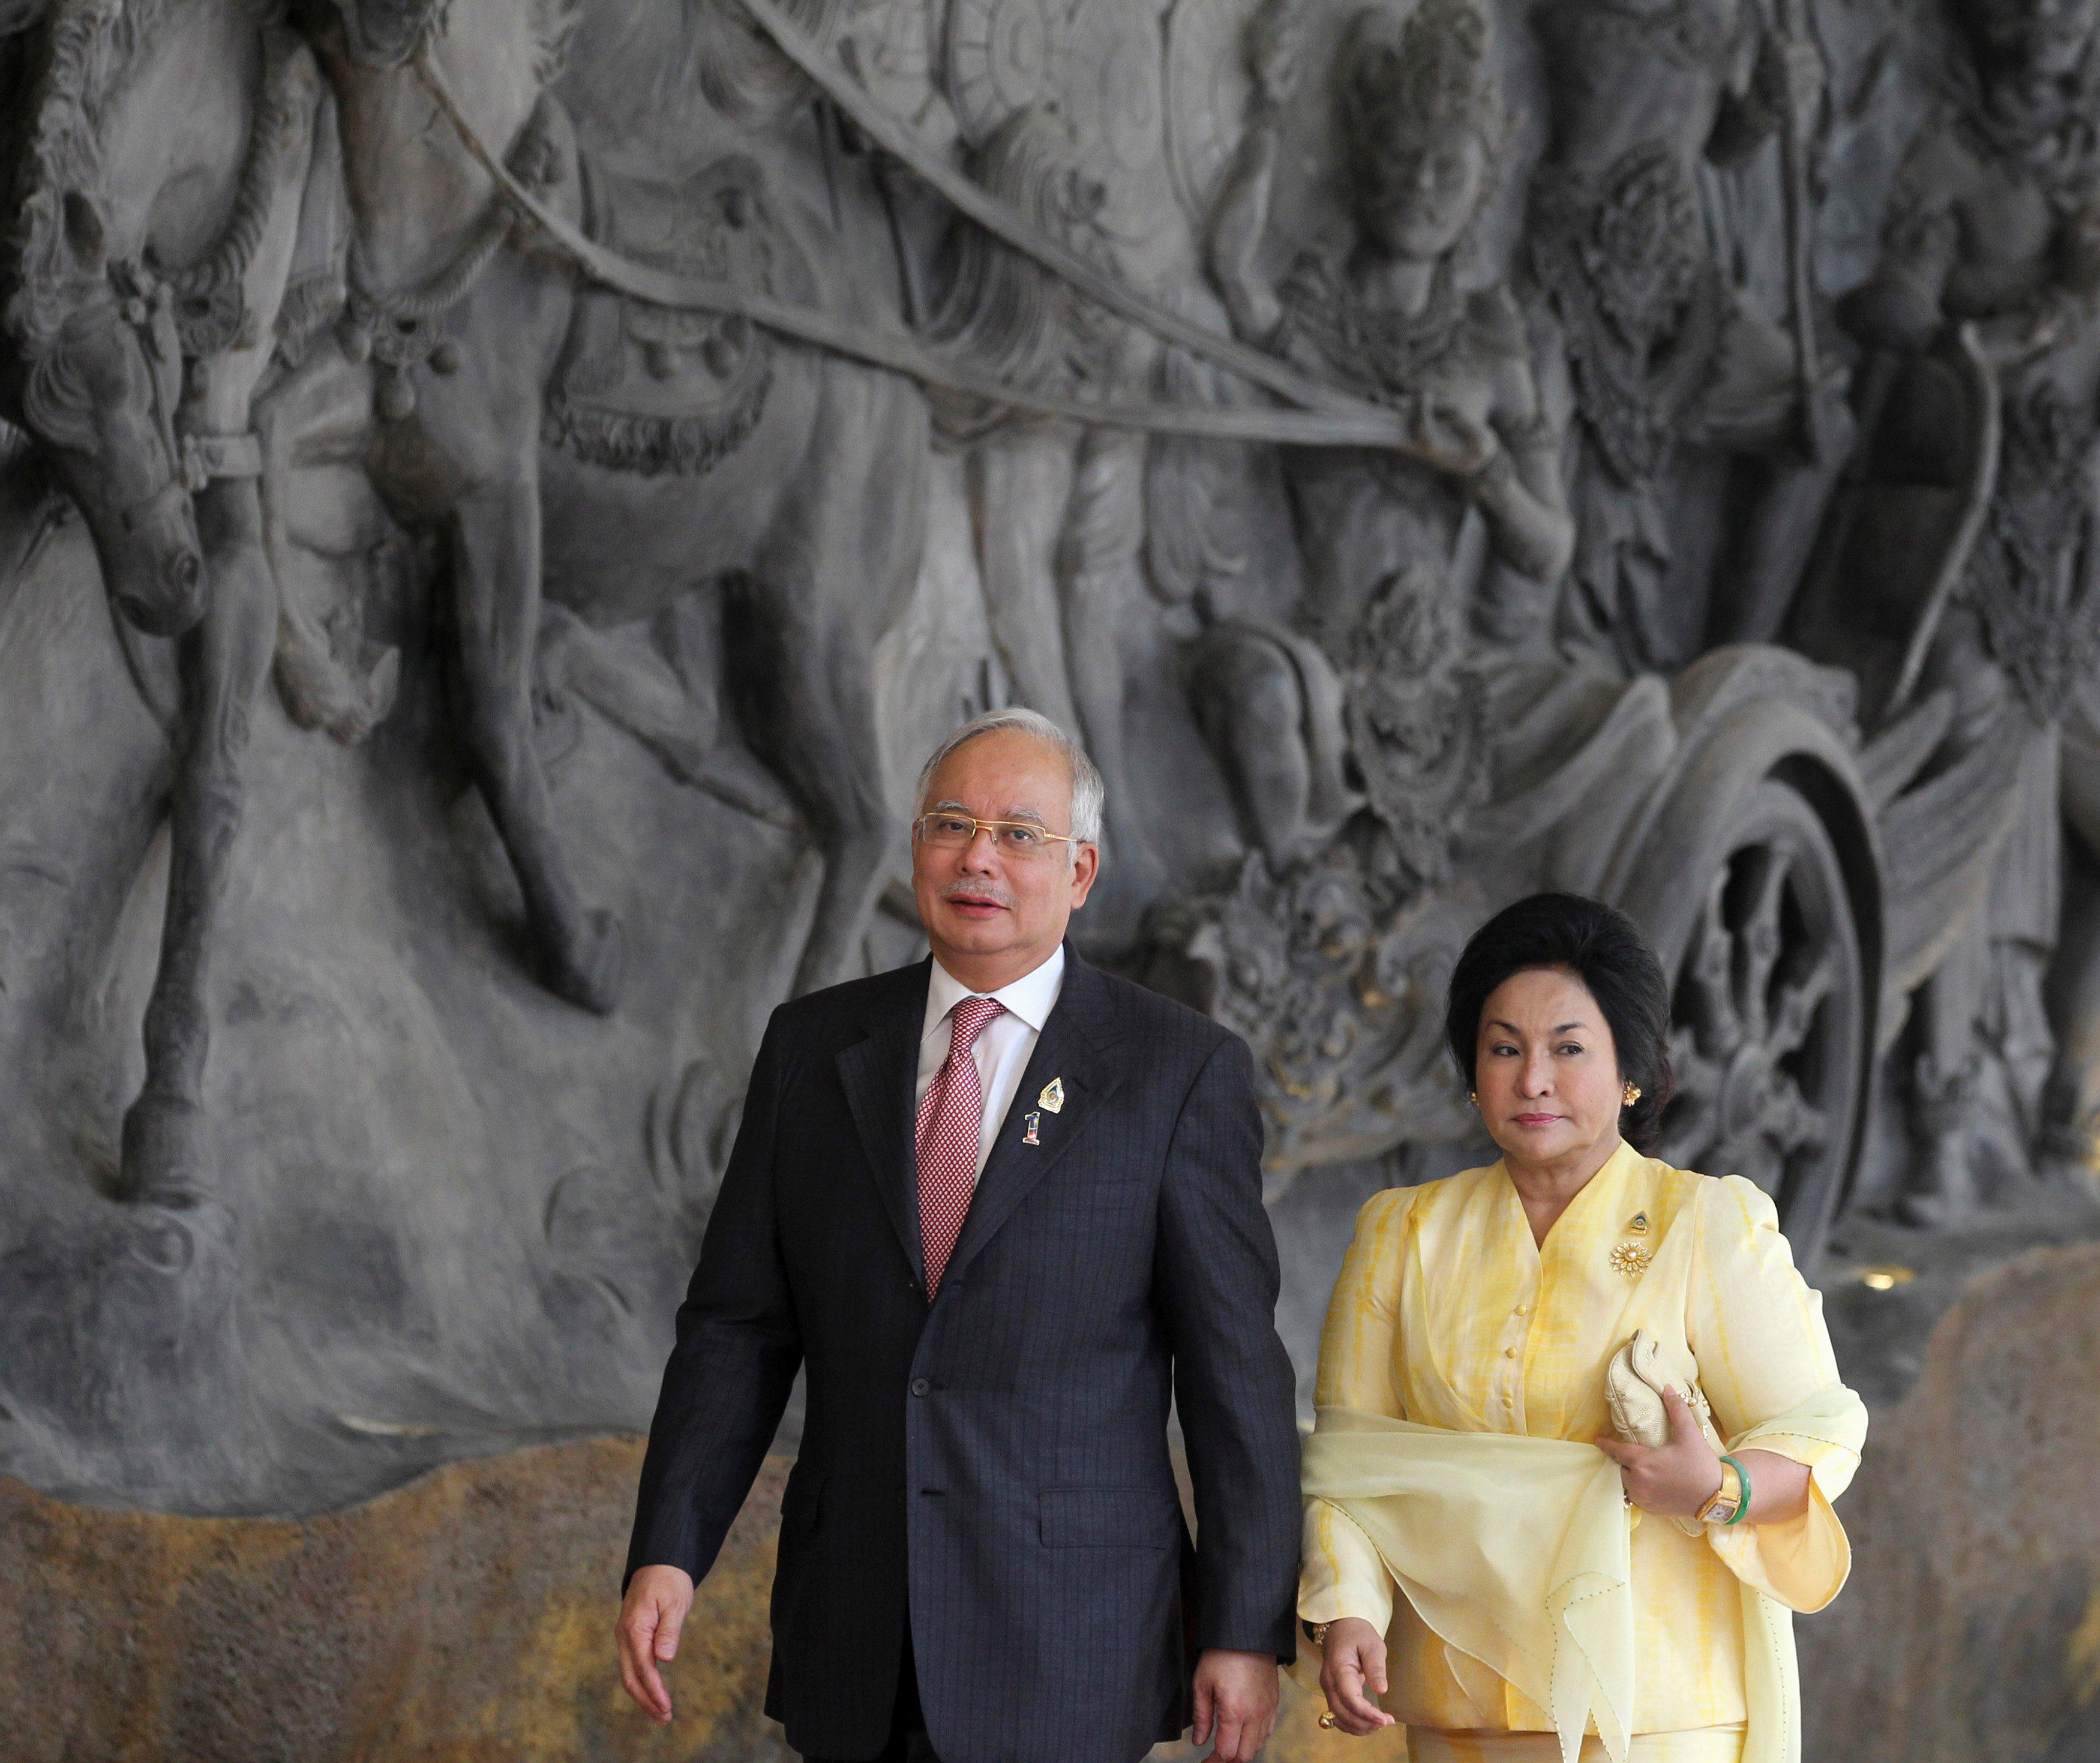 Rosmah Mansor arrives with her husband Najib Razak at an event in 2011. She is accused of using funds from Malaysia’s 1MDB to buy millions of US dollars worth of handbags, jewellery and other luxury goods. Photo: Reuters